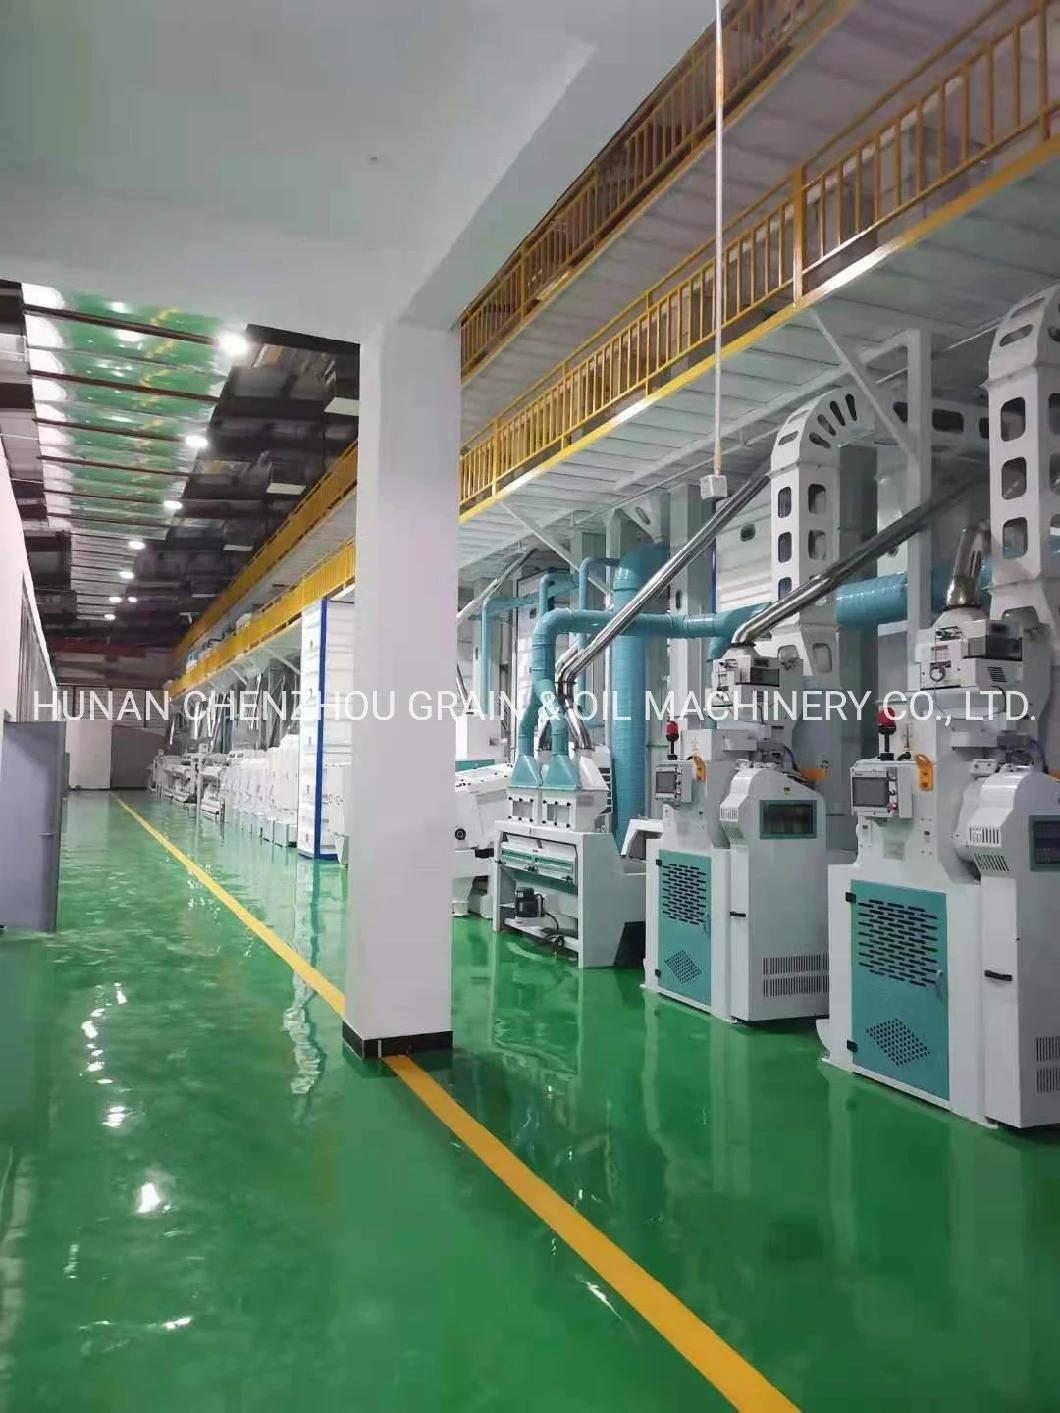 300tpd Parboiling Automatic Rice Milling Bangladesh